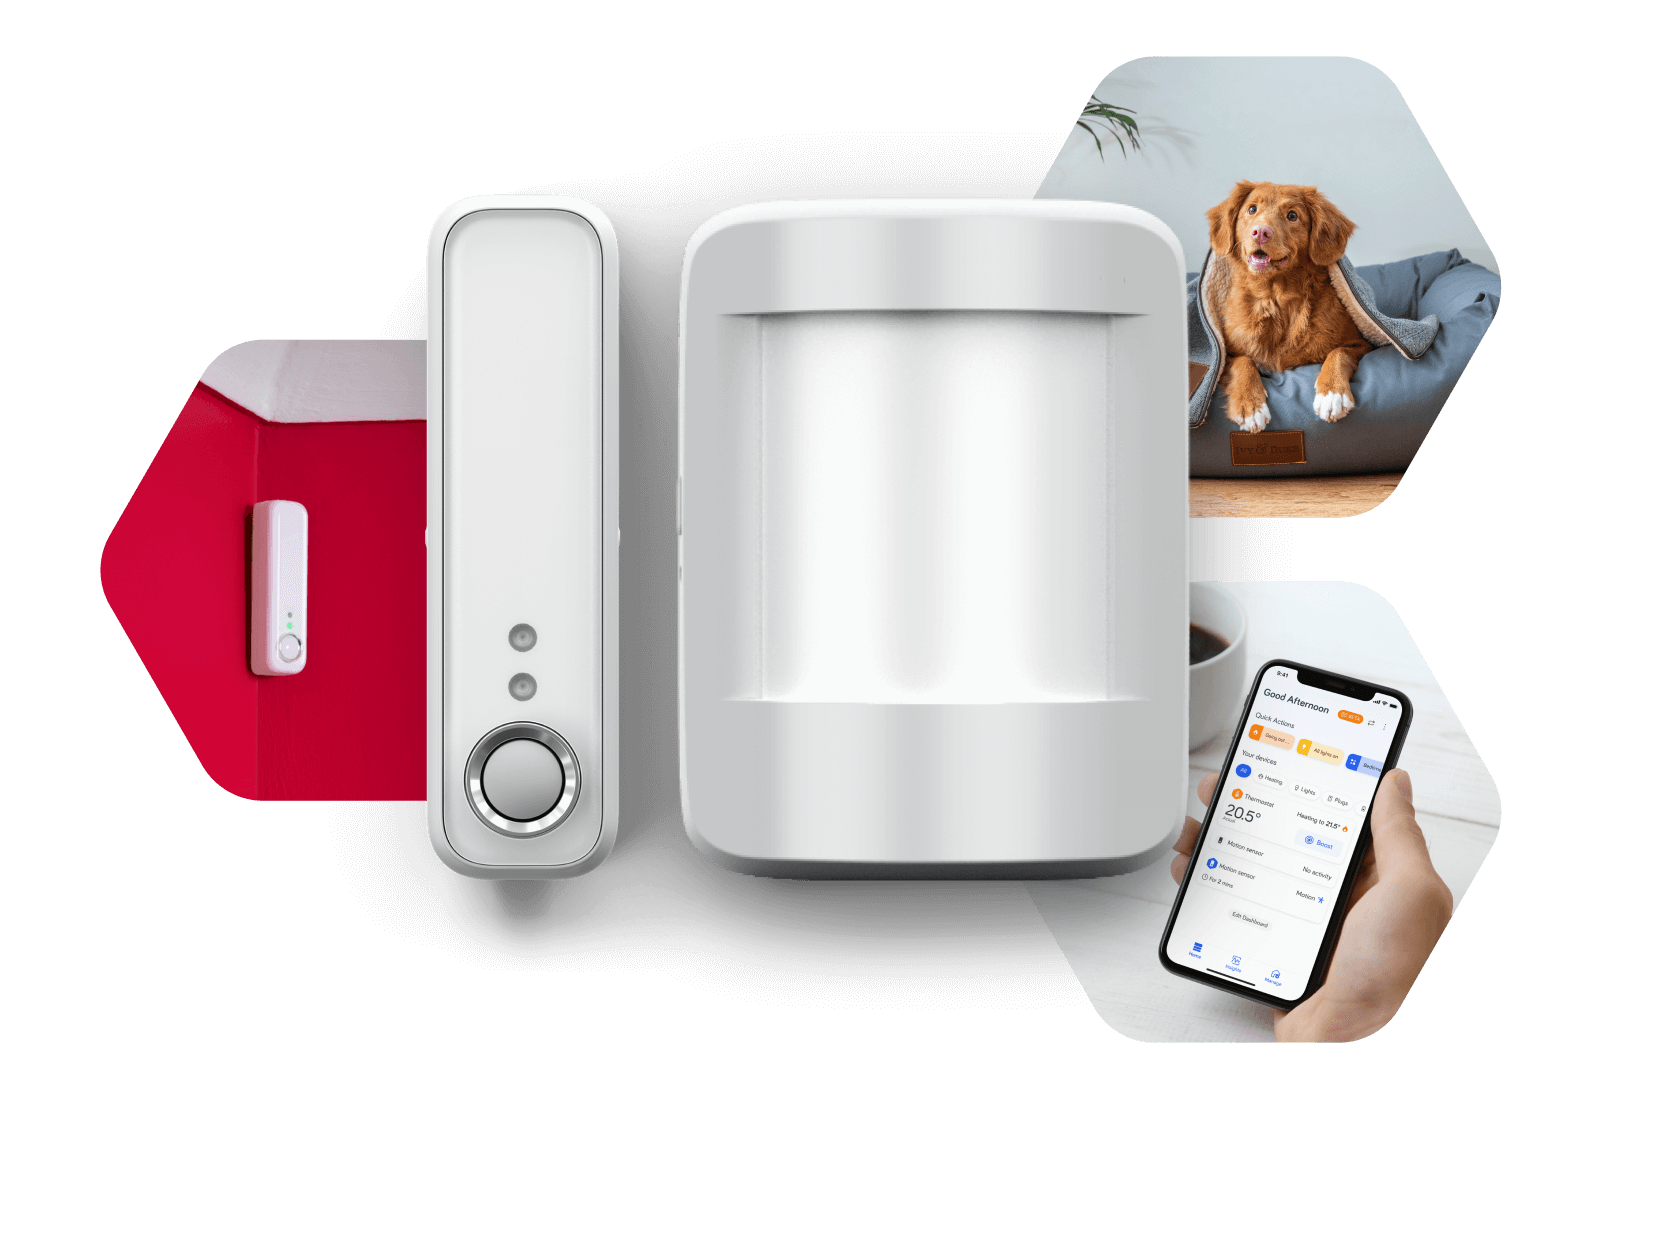 Hive Motion Sensor product in-use in the home